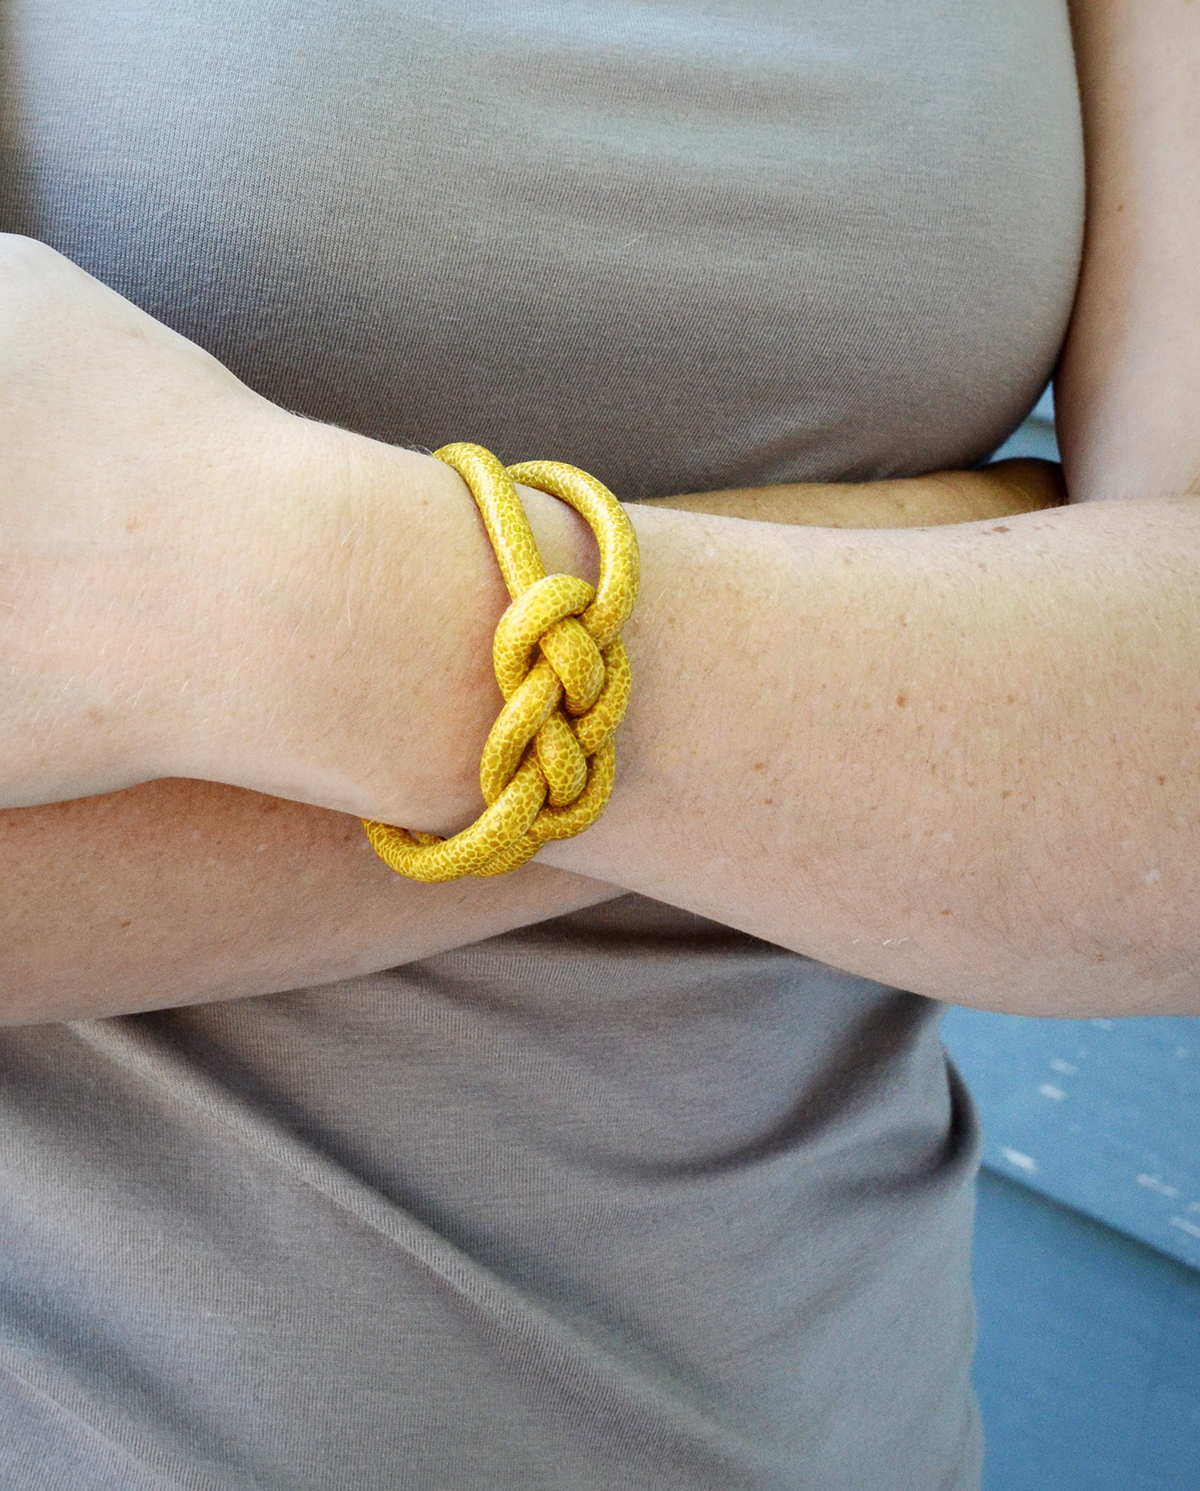 How to make knotted rope bracelets diy 14